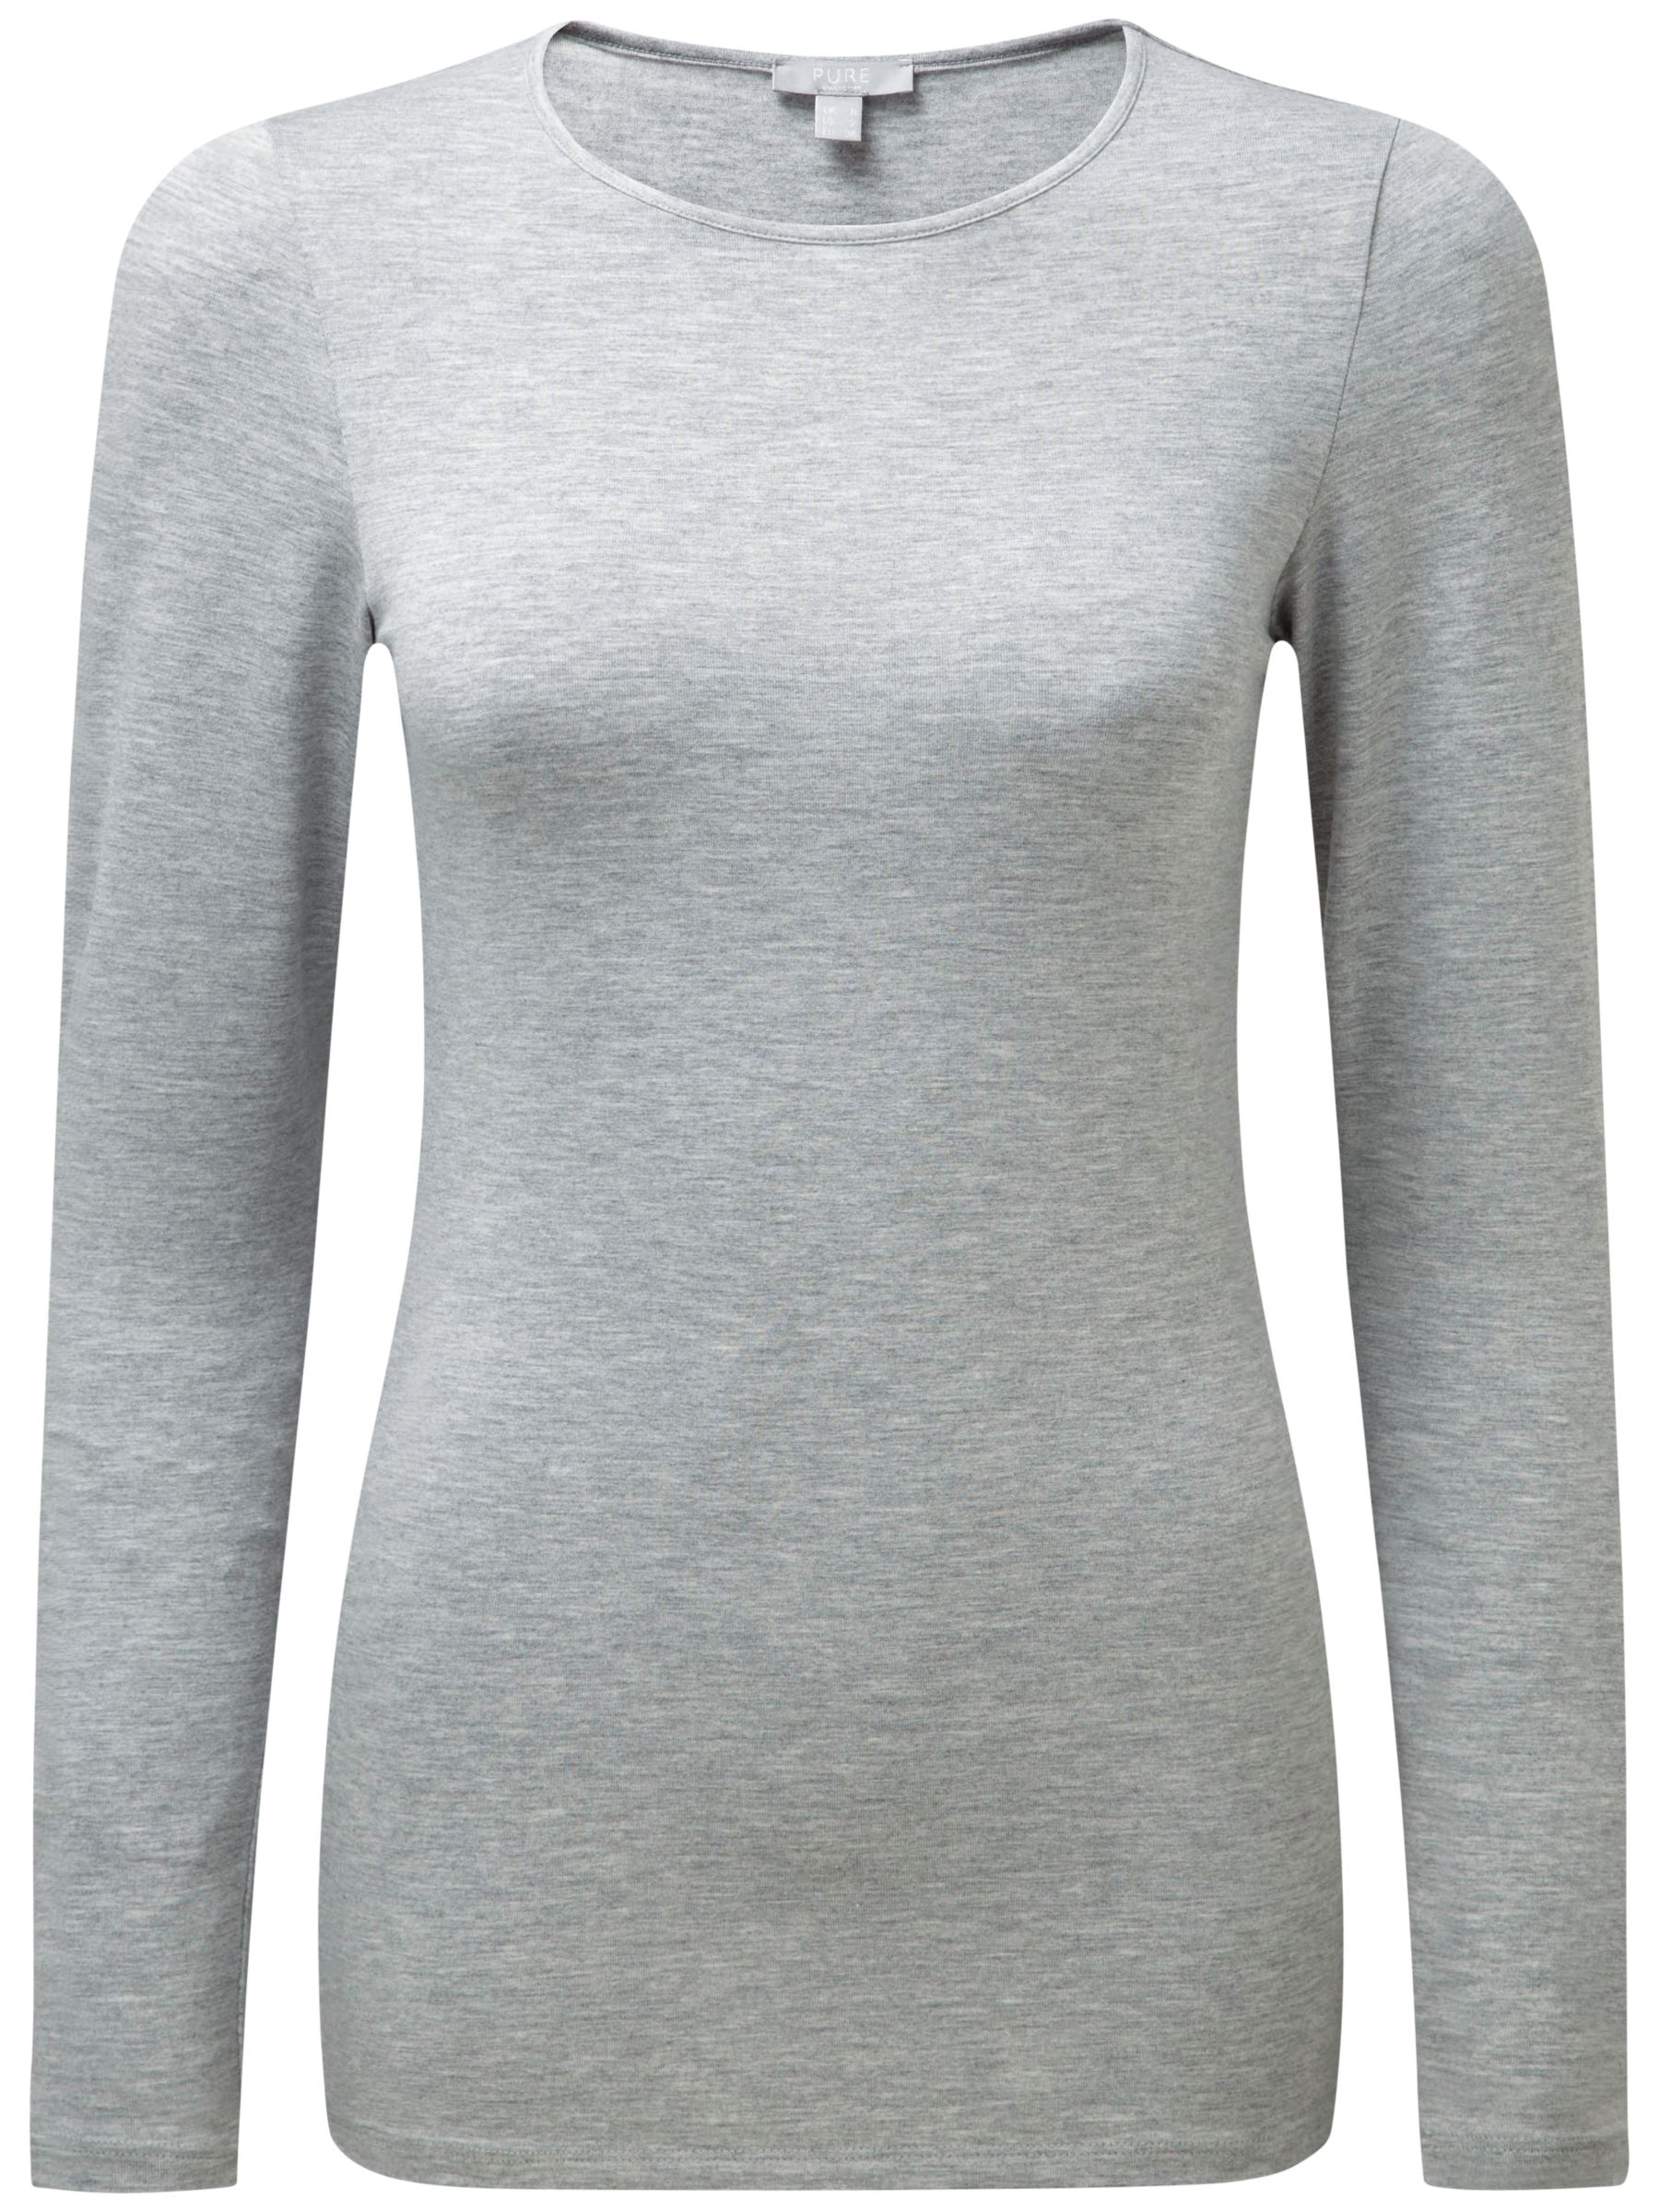 Pure Collection Soft Jersey Crew Neck Top, Light Grey Marl